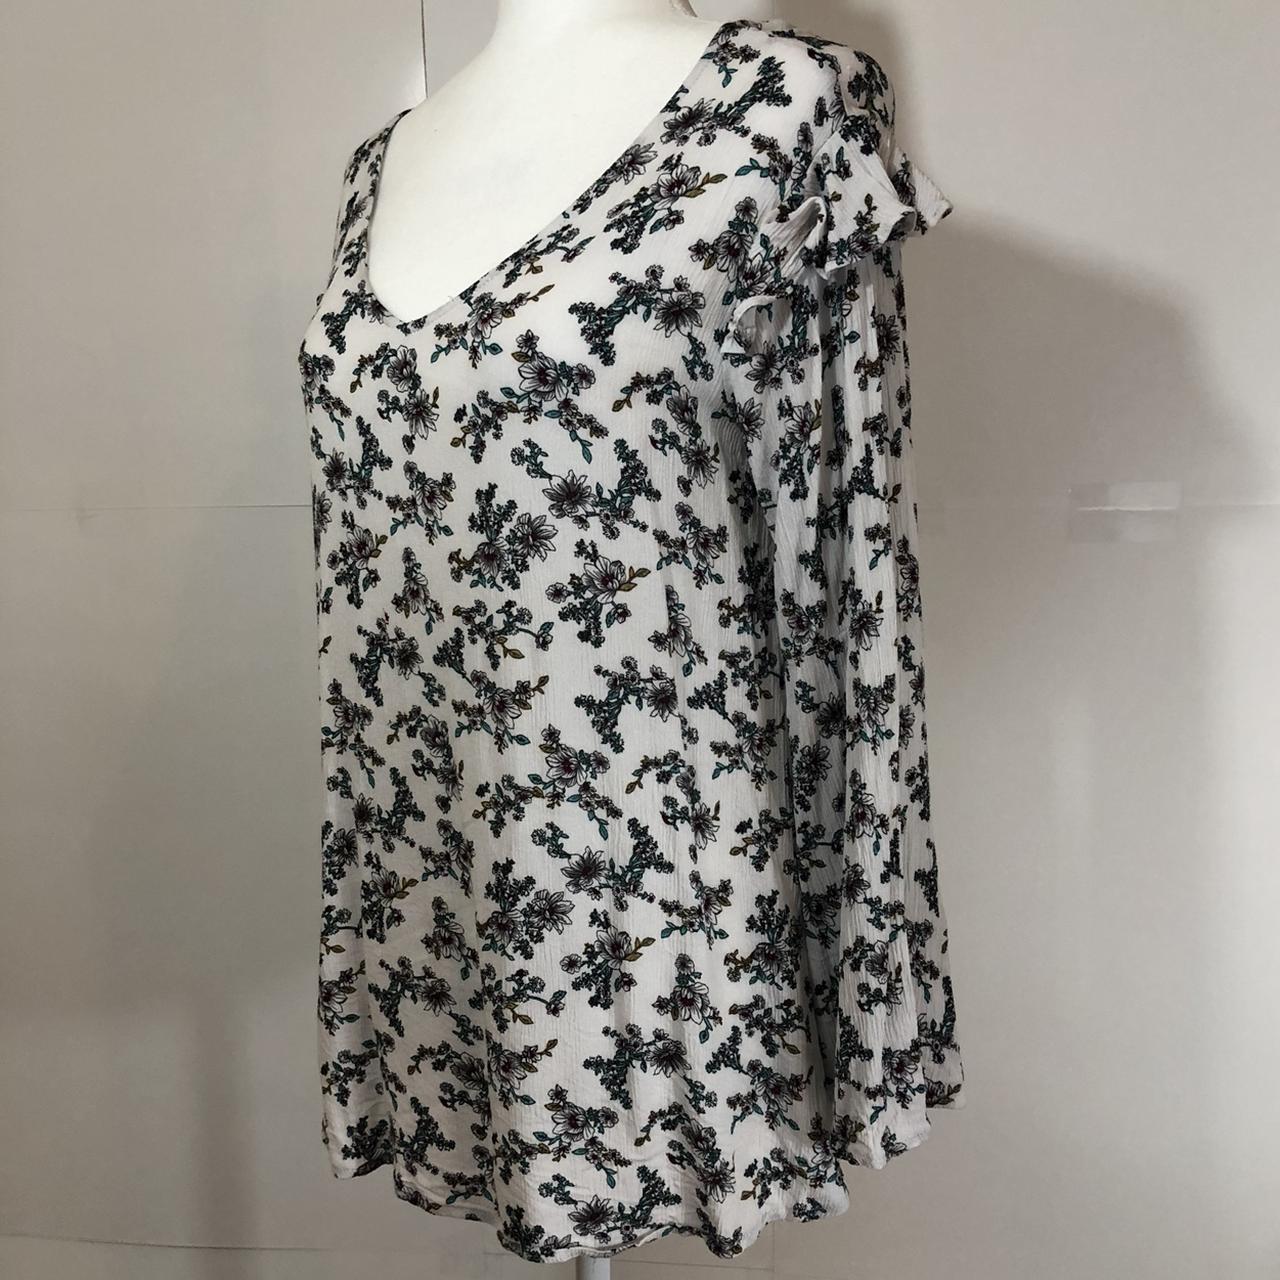 Kori America size small floral print blouse with... - Depop